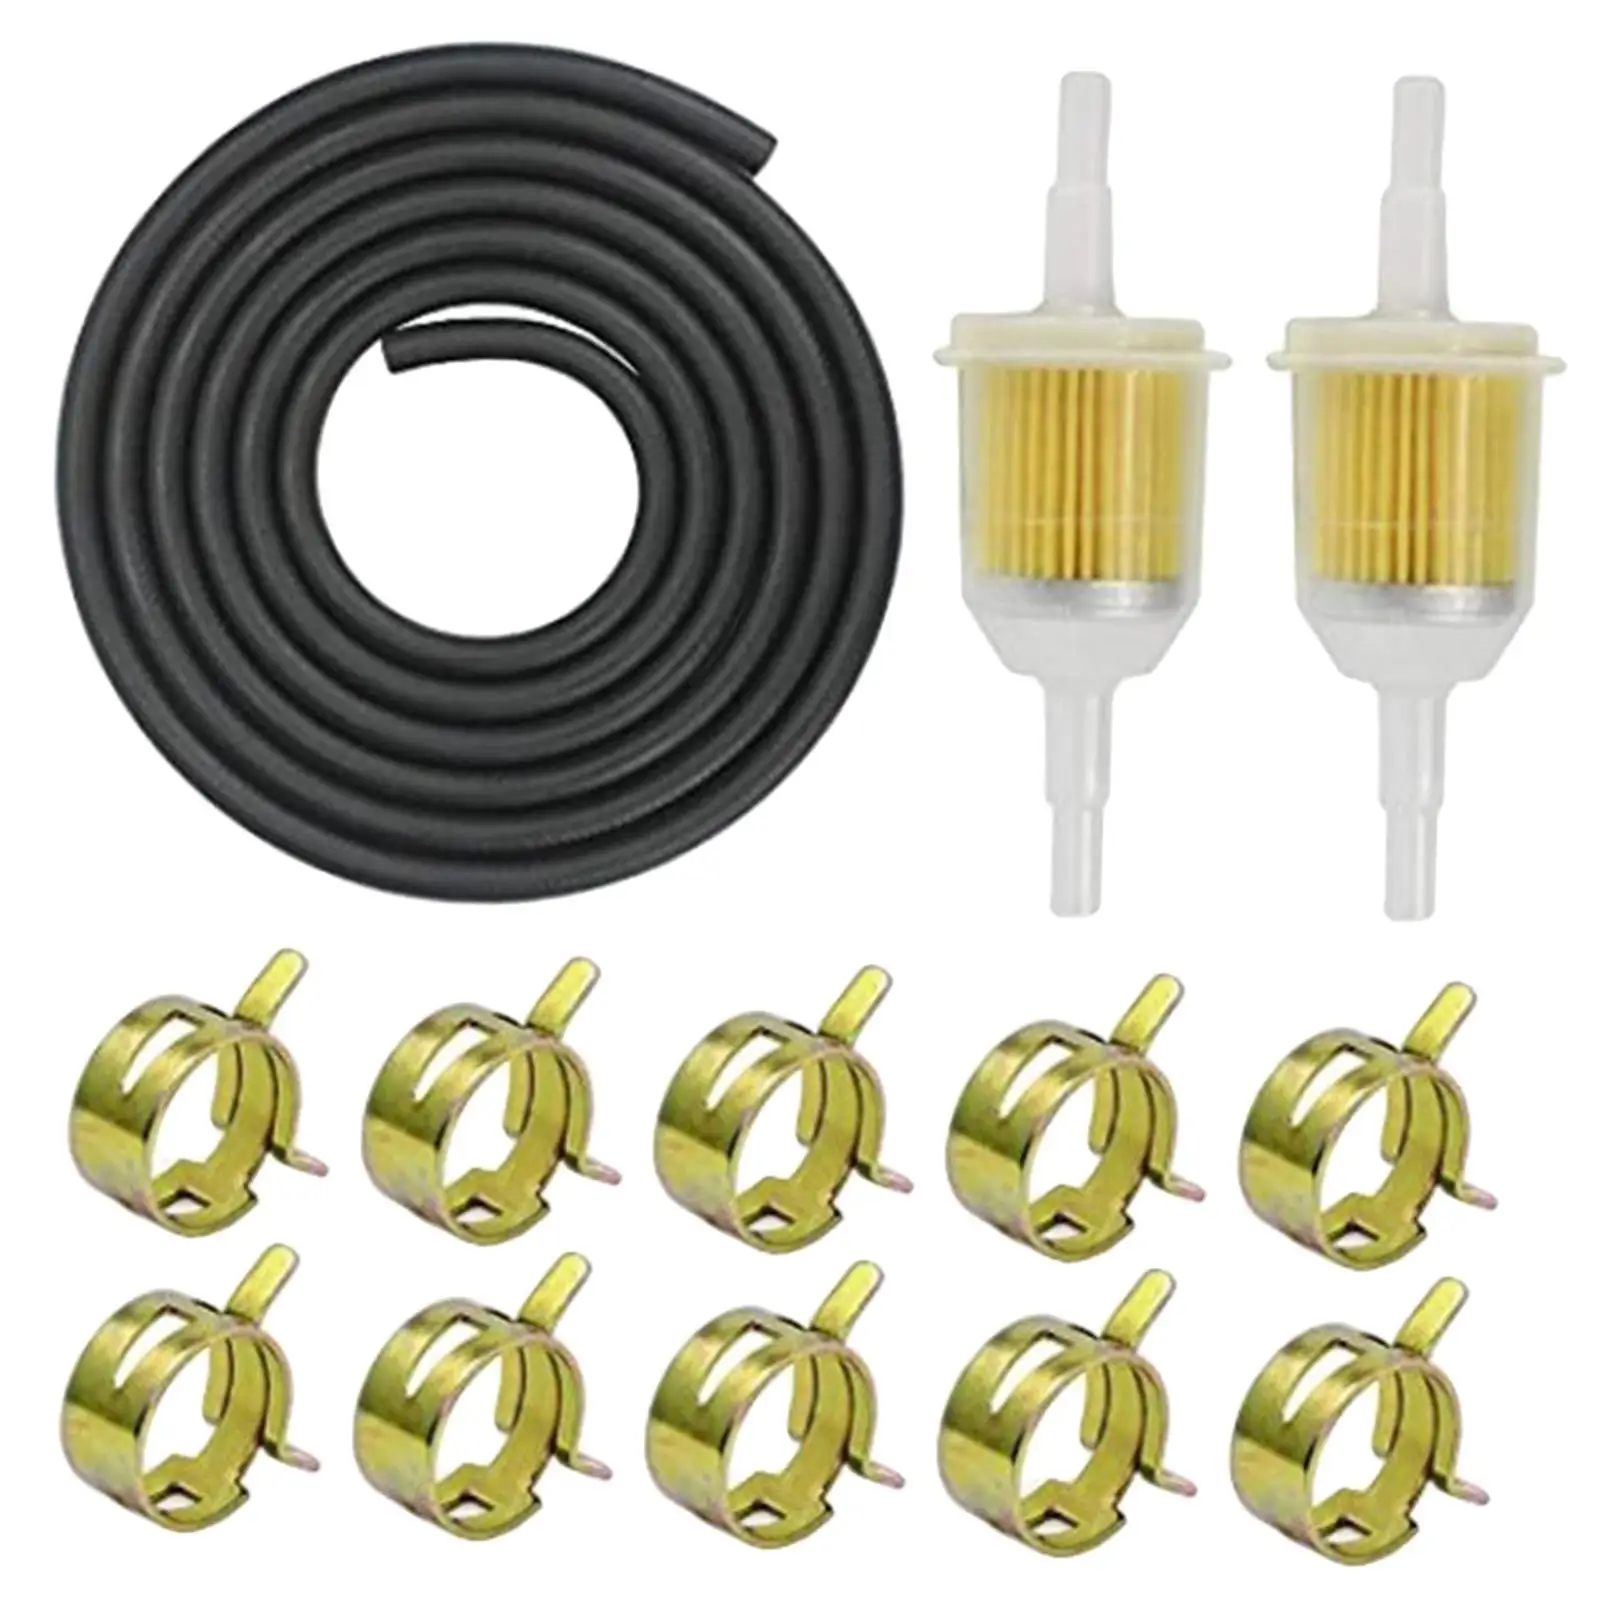 Fuel Line Hose Kit 2pc 8mm Oil Filters 10pc Hose Clamps for Lawn Mowers Snowmobiles Motorcycles